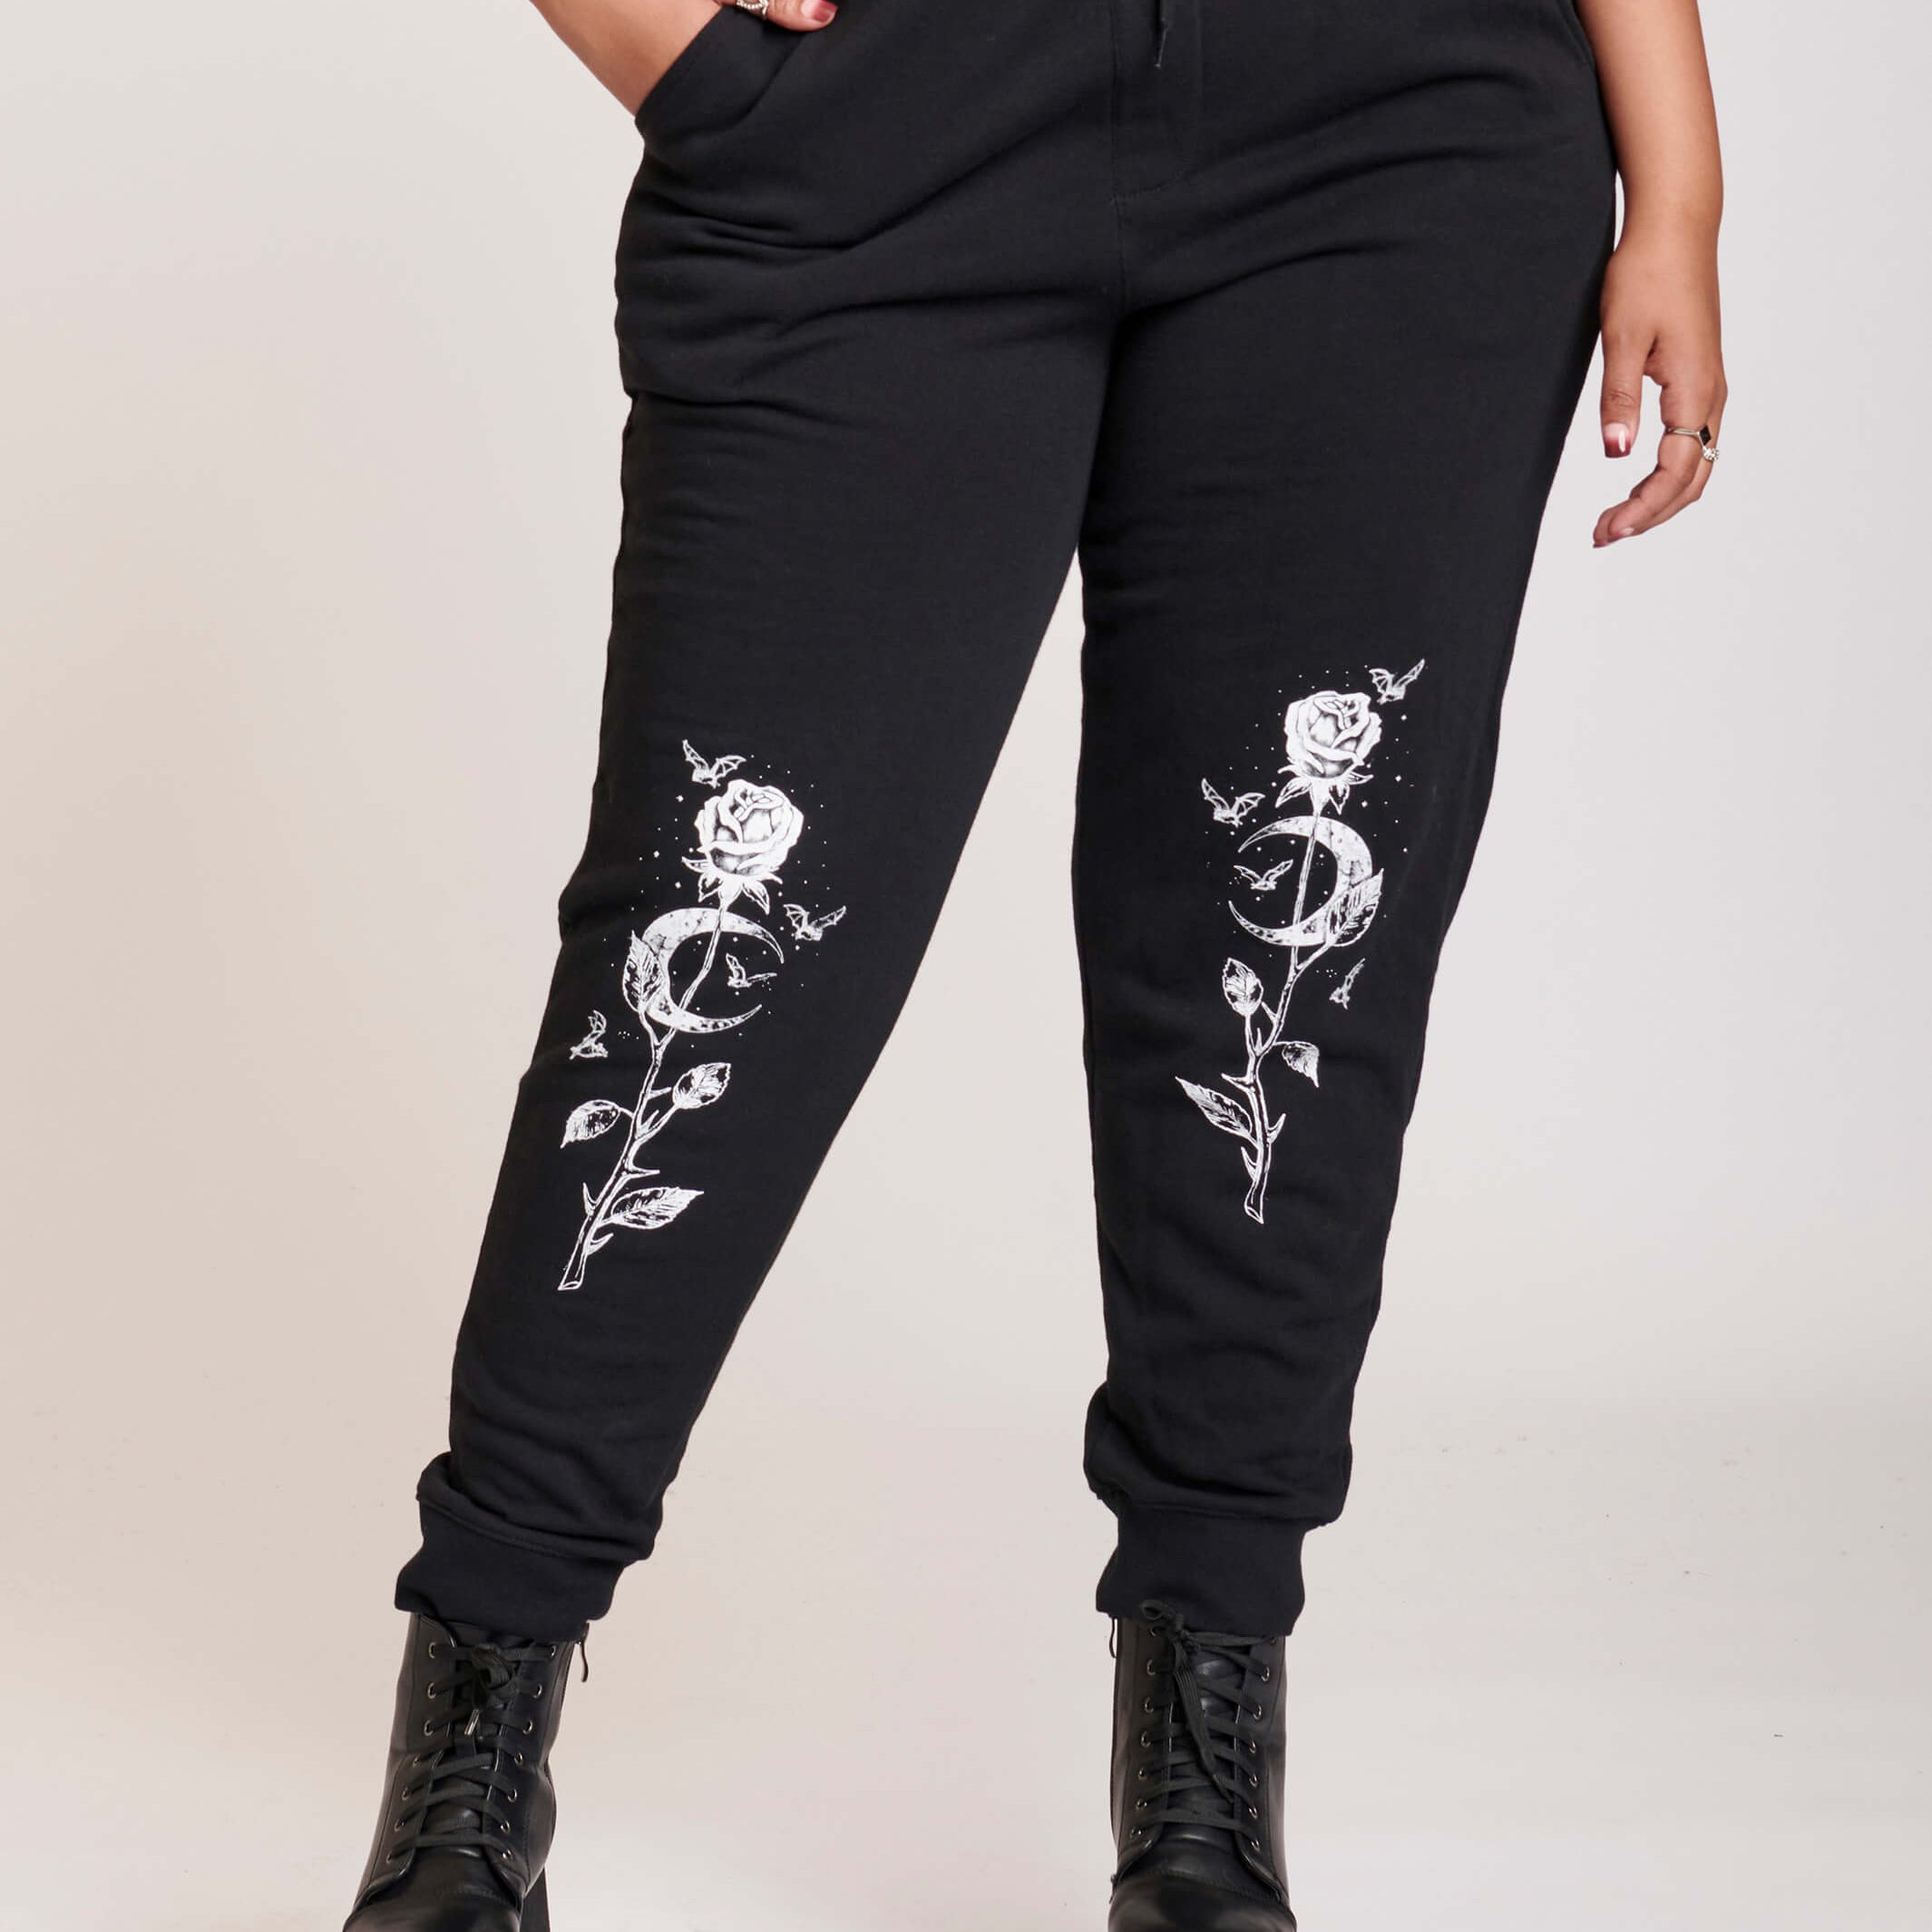 Black jogger with white rose and cresecent moon art at knees